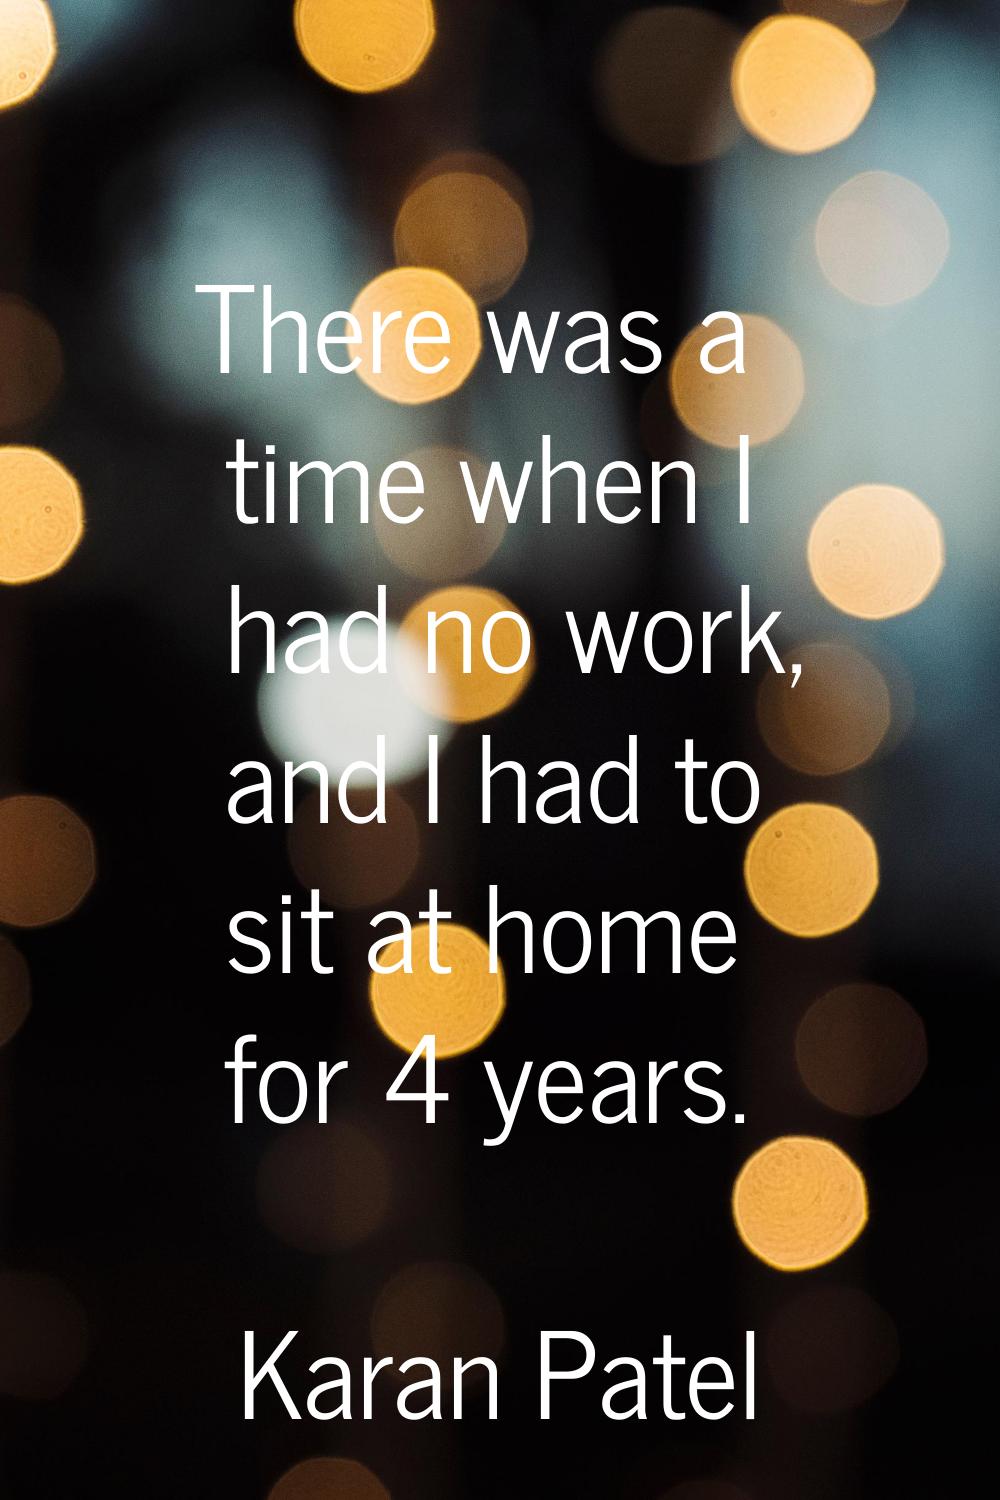 There was a time when I had no work, and I had to sit at home for 4 years.